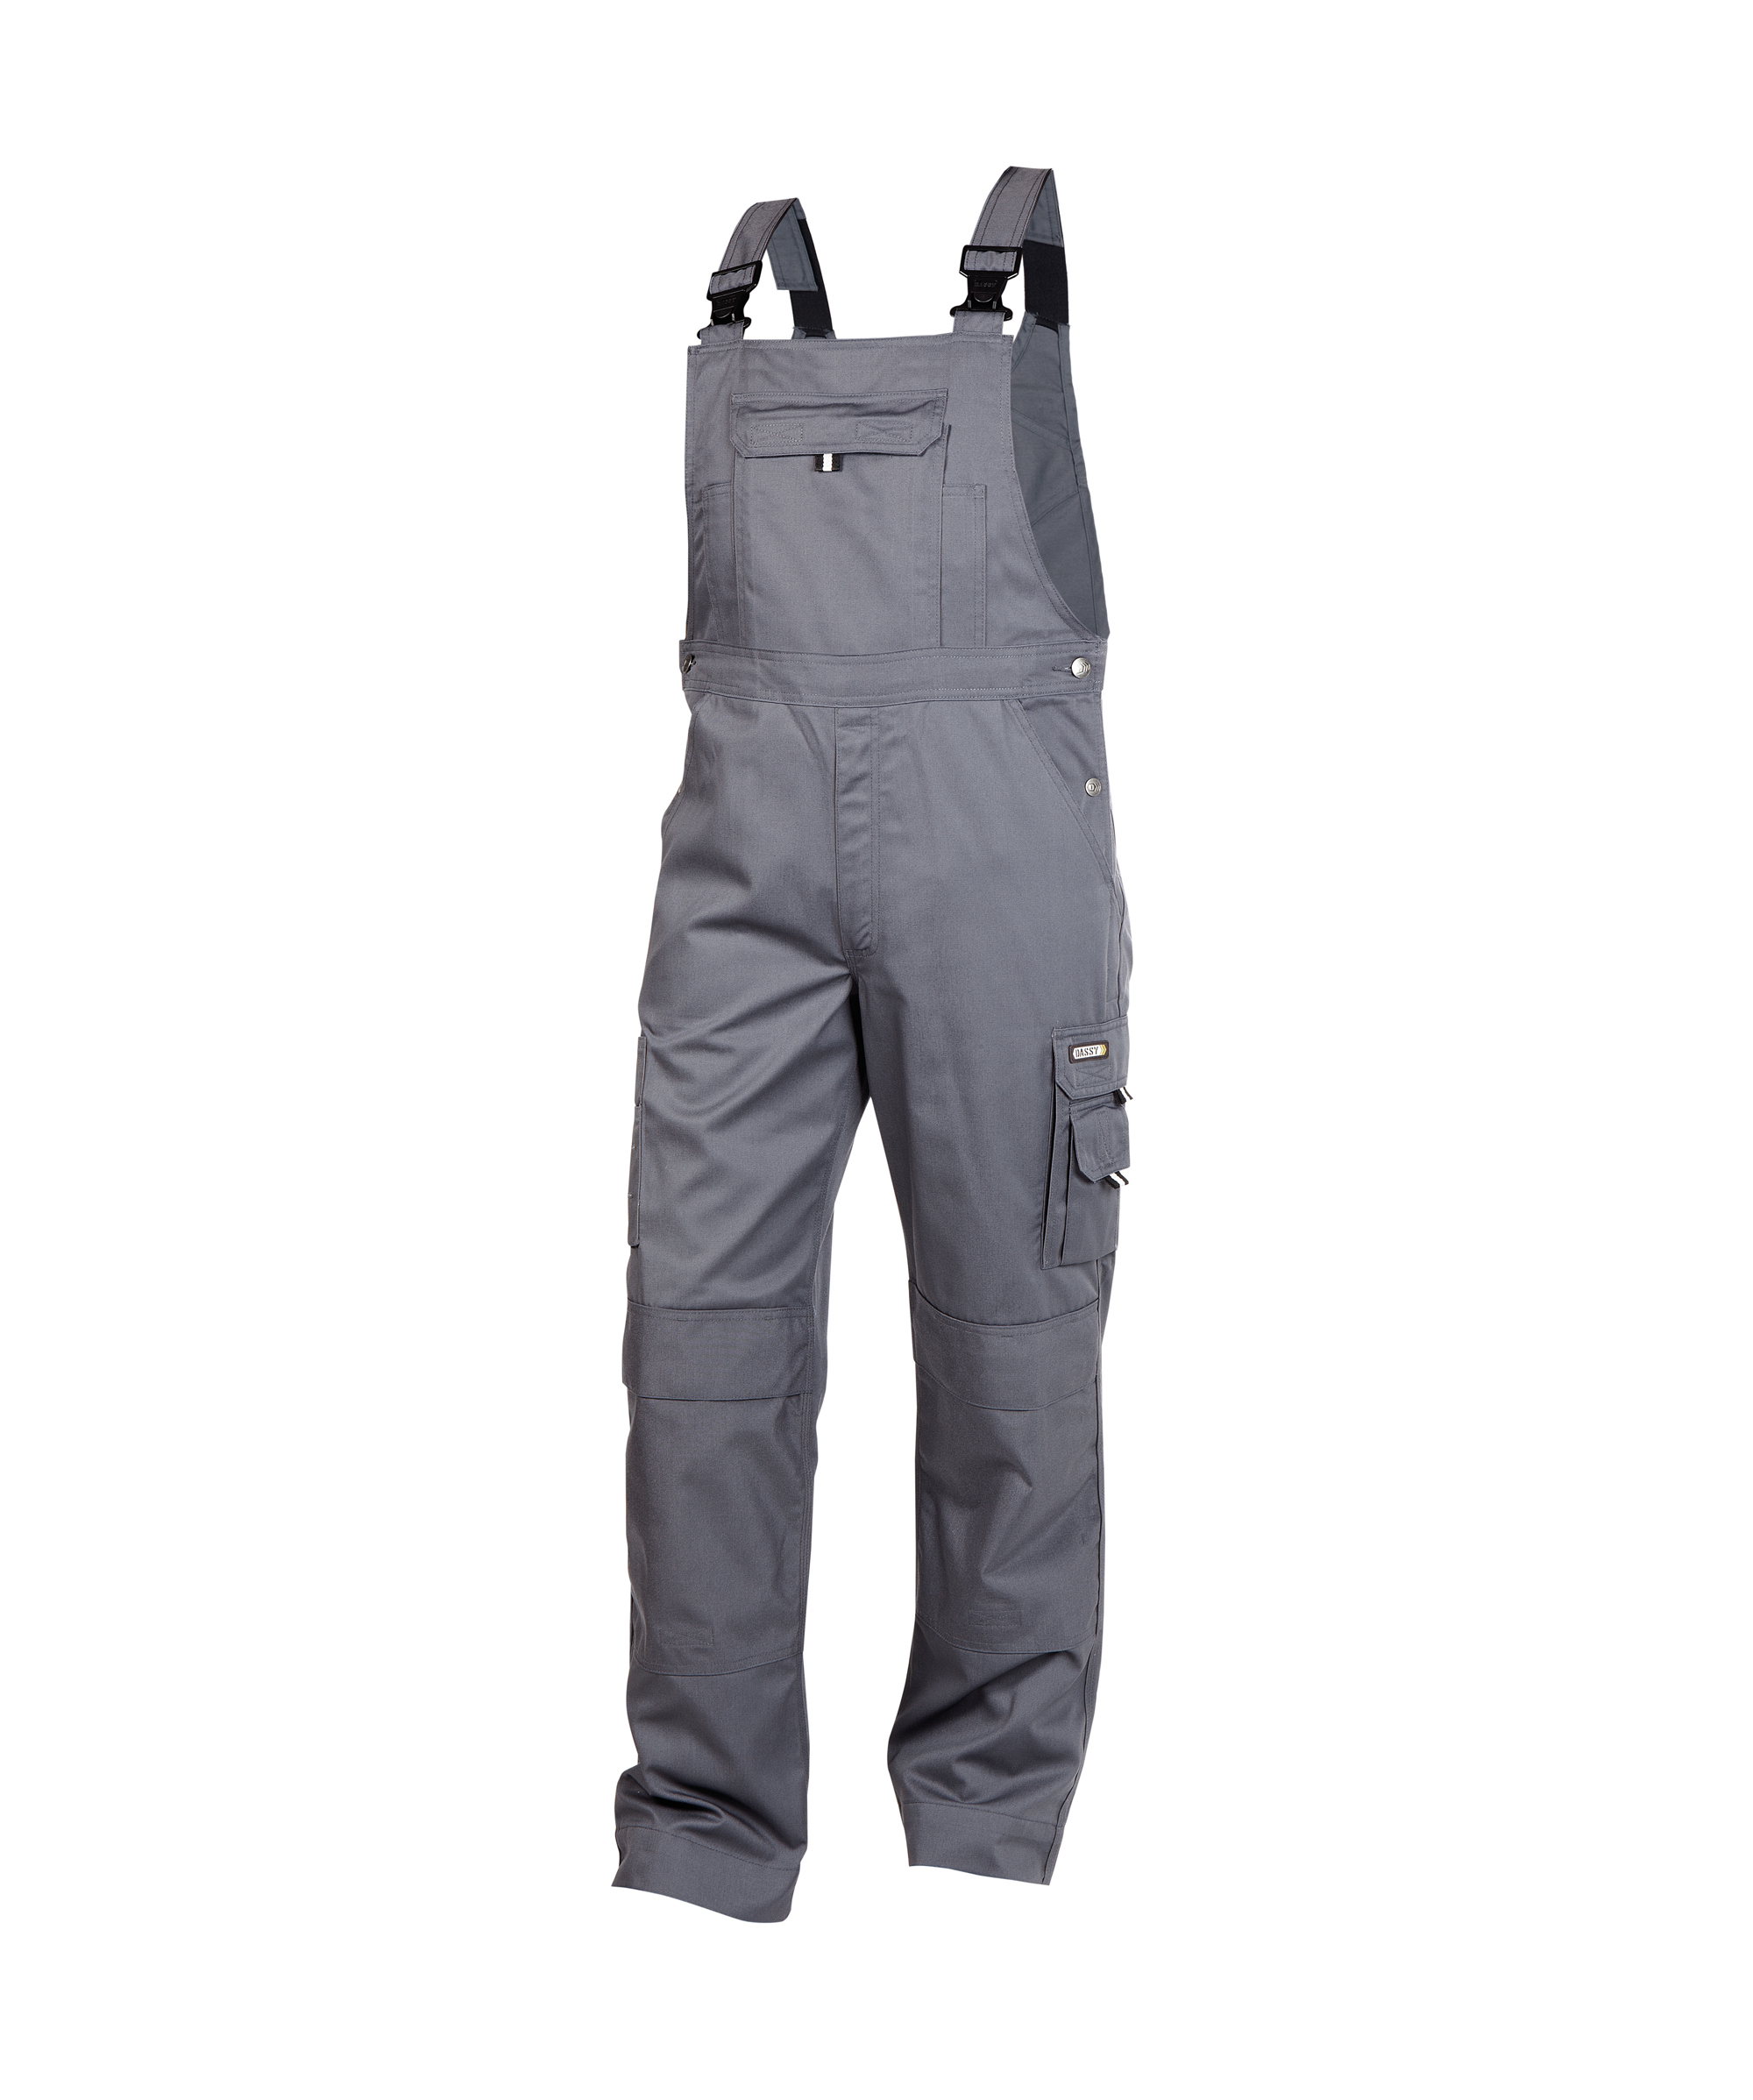 ventura_brace-overall-with-knee-pockets_cement-grey_front.jpg